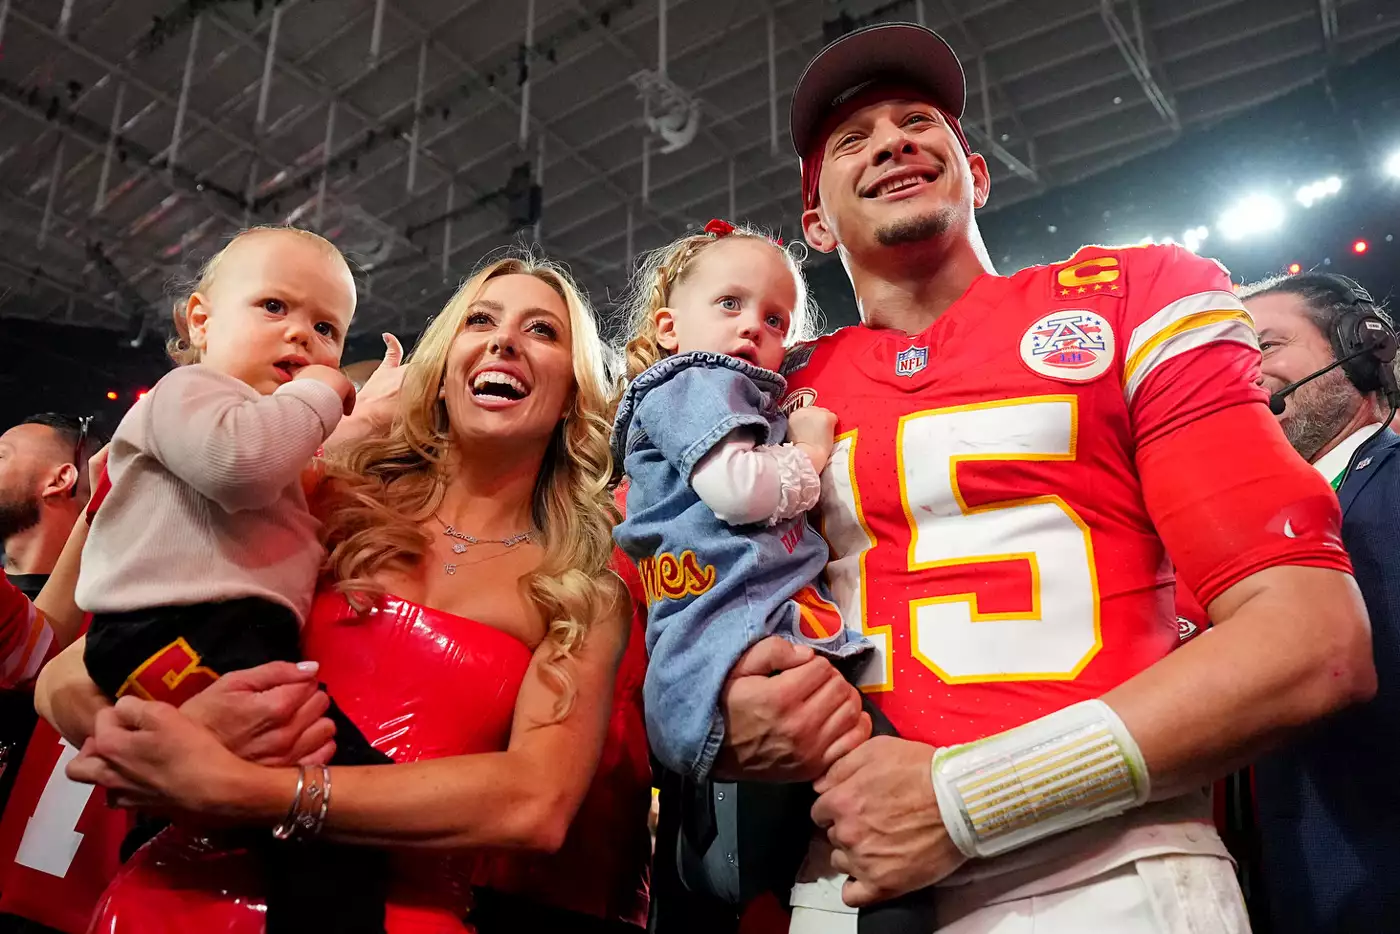 Super Bowl LVIII: Kansas City Chiefs Patrick Mahomes (15) poses with wife Brittany Mahomes and their 𝘤𝘩𝘪𝘭𝘥ren Patrick Bronze and Sterling Skye following victory vs San Francisco 49ers at Allegiant Stadium.